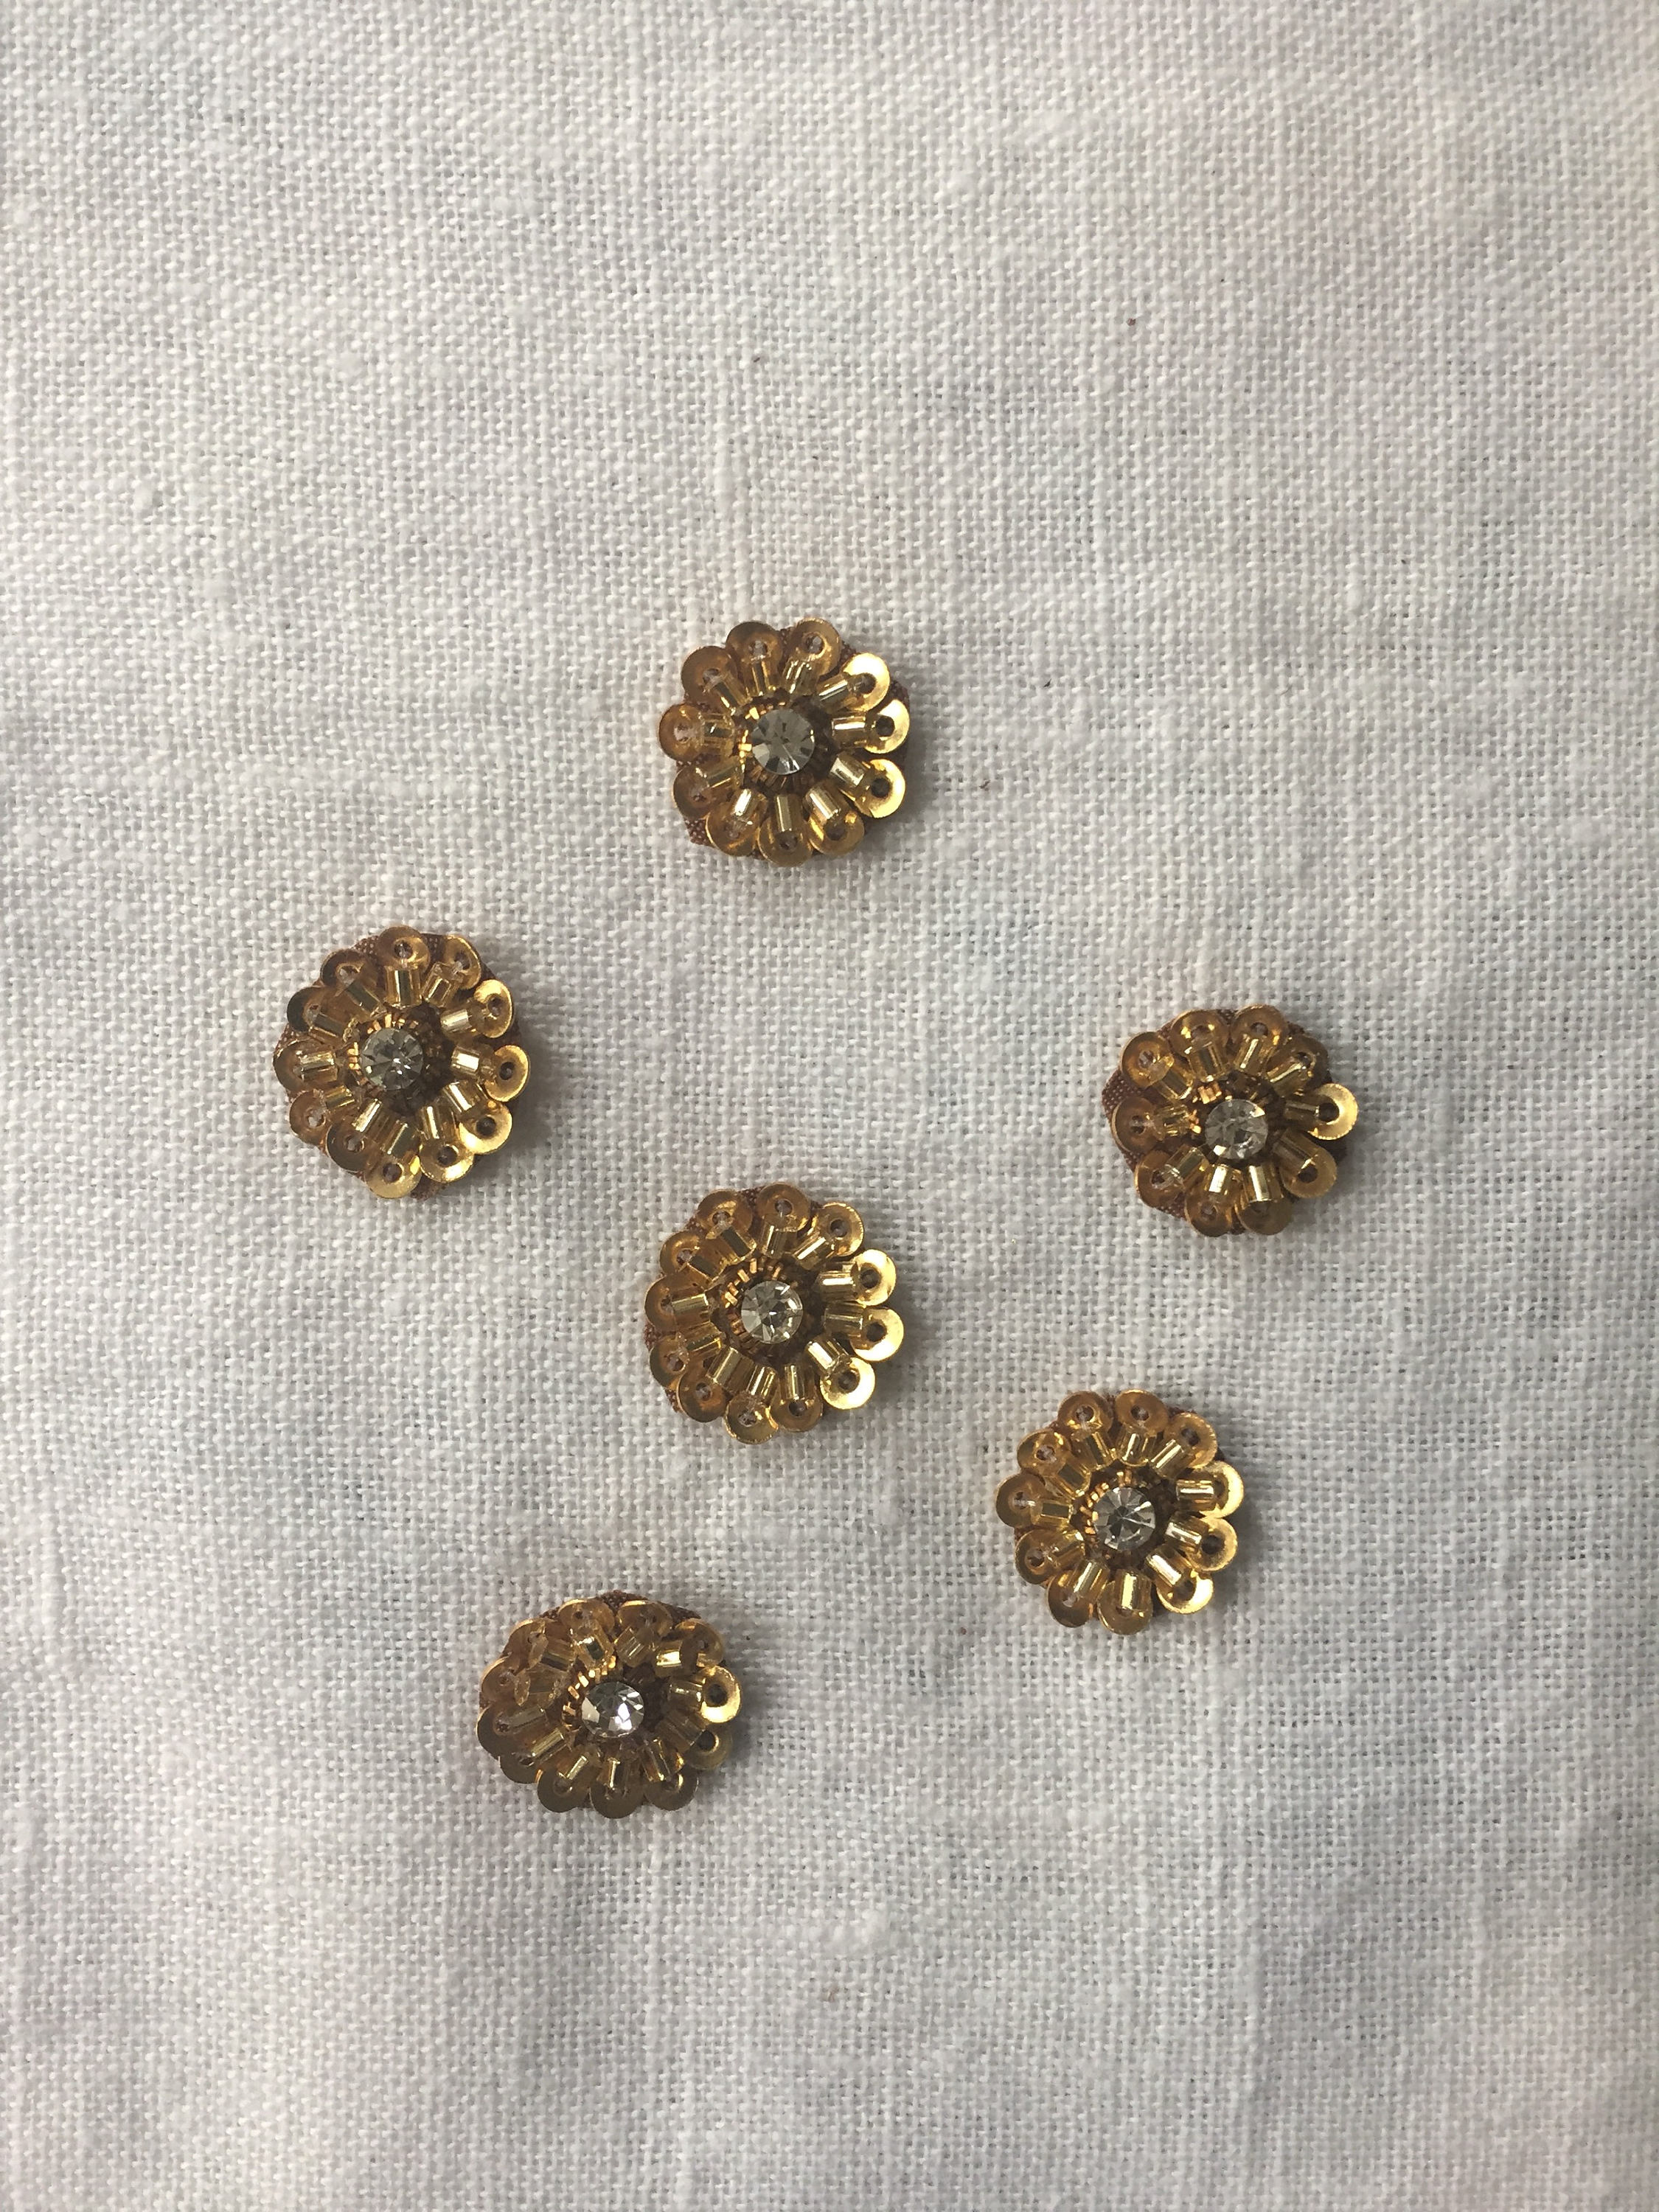 Tiny Gold Floral Embroidery Applique,Indian Zari Sequin Embroidery ...